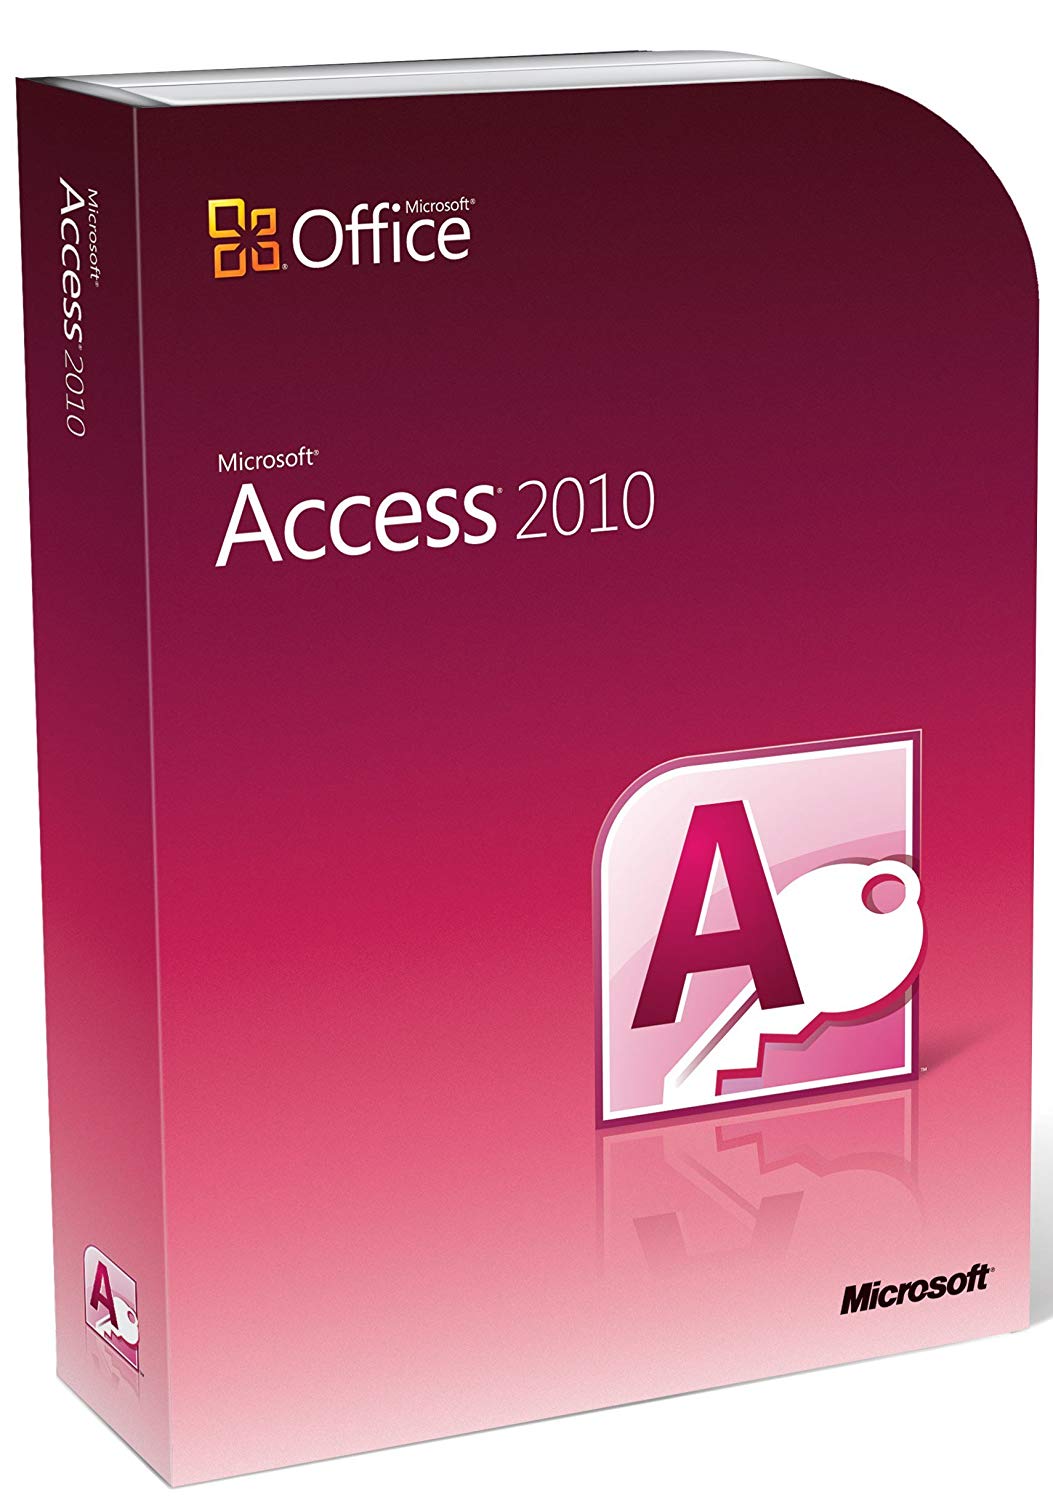 ms access 2010 trial version free download